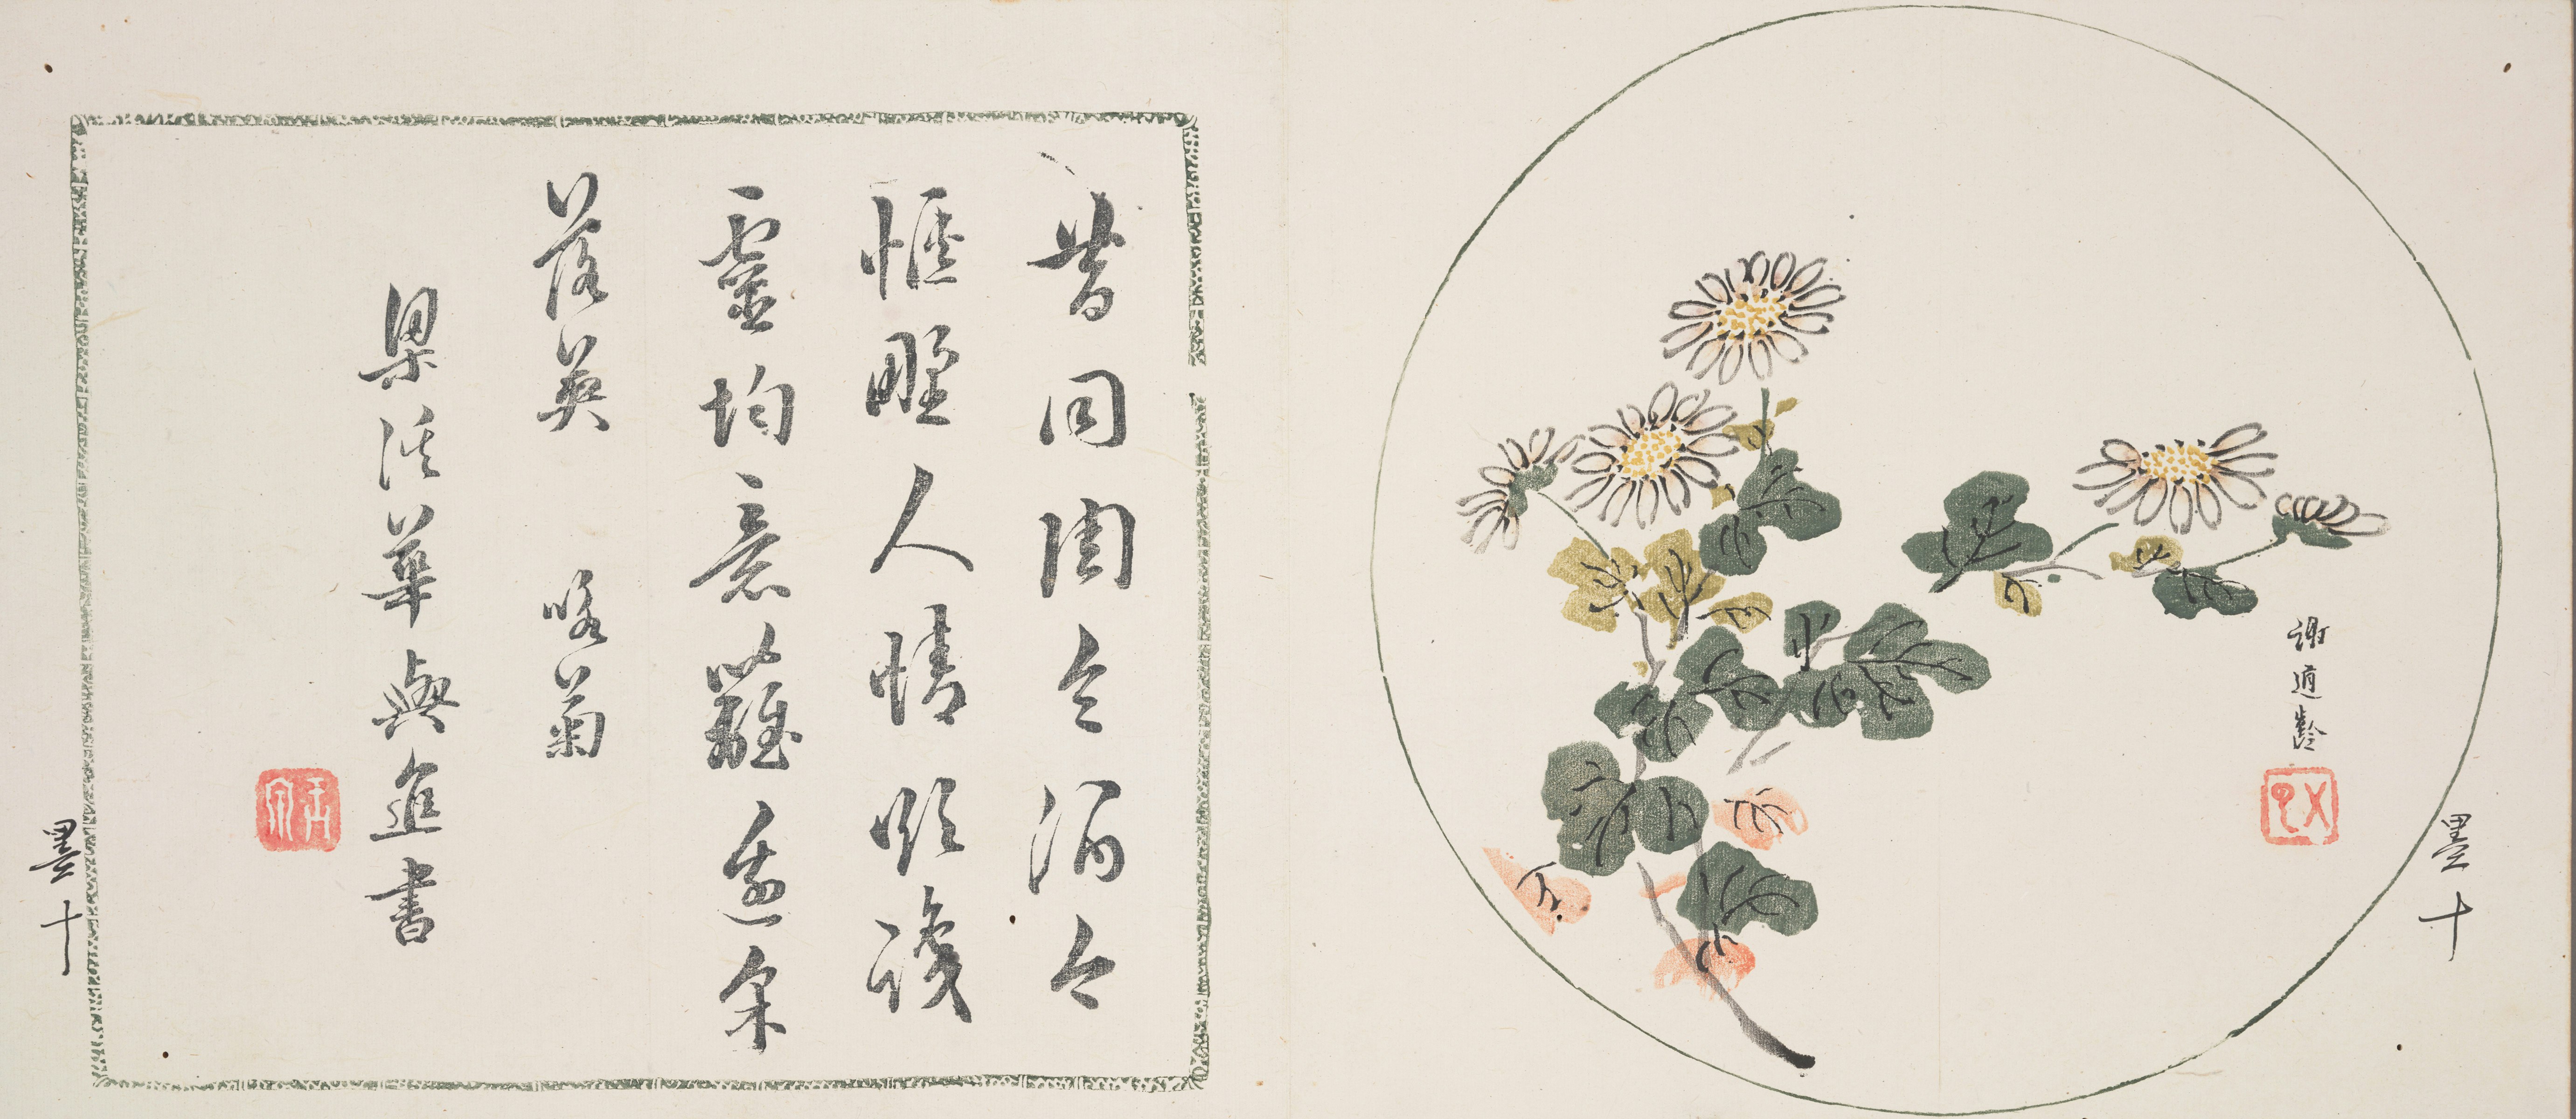 Artwork caption: Hu Zhengyan 胡正言, et al., Ten Bamboo Studio Manual of Calligraphy and Painting 十竹齋書畫譜, vol. 3, Ming dynasty, 1633, multicolor woodblock print on paper, 9 3/4 in. x 11 1/4 in. The Huntington Library, Art Museum, and Botanical Gardens.